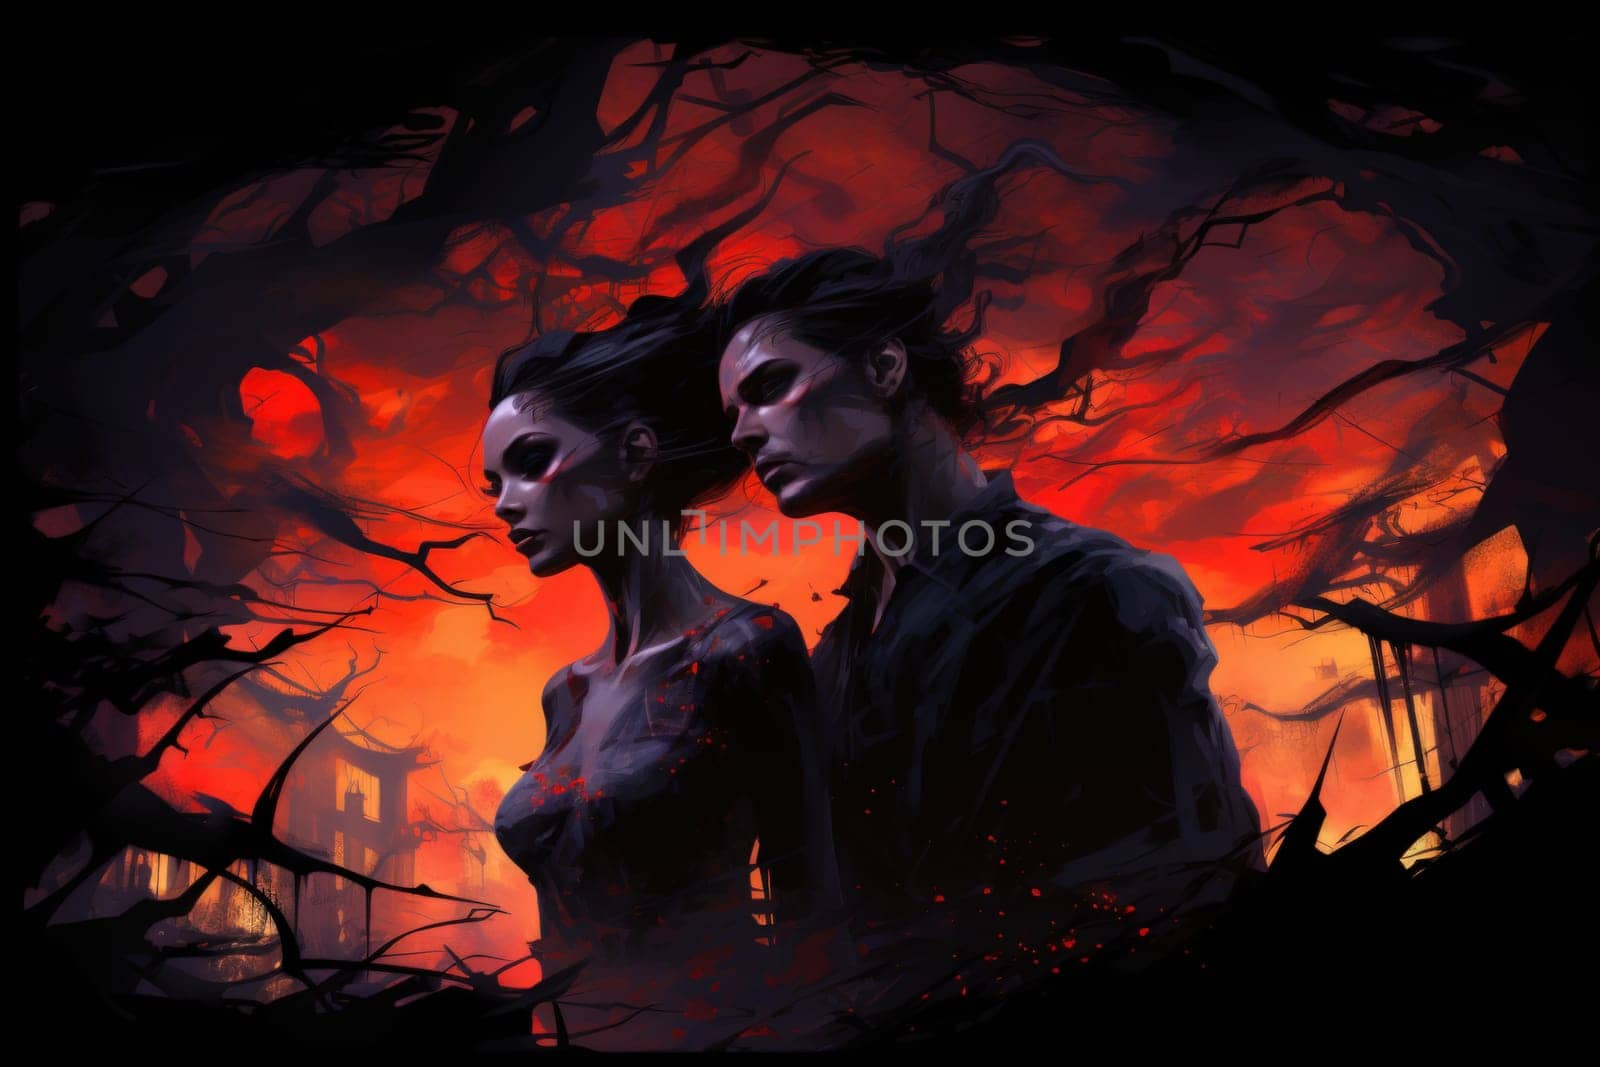 Step into a world where hauntingly beautiful vampires captivate with their ethereal allure.